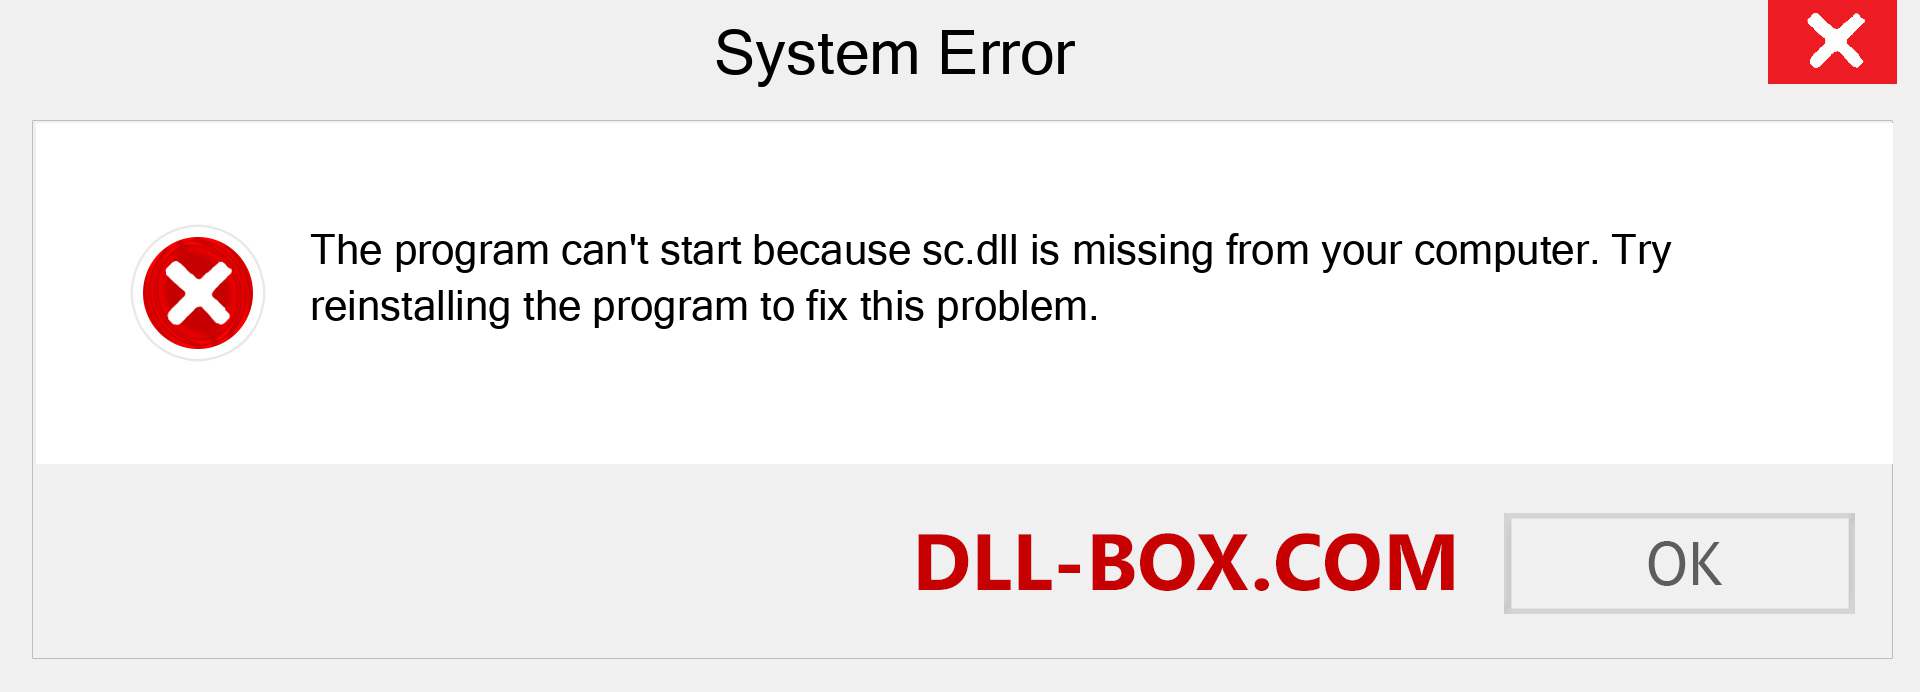  sc.dll file is missing?. Download for Windows 7, 8, 10 - Fix  sc dll Missing Error on Windows, photos, images